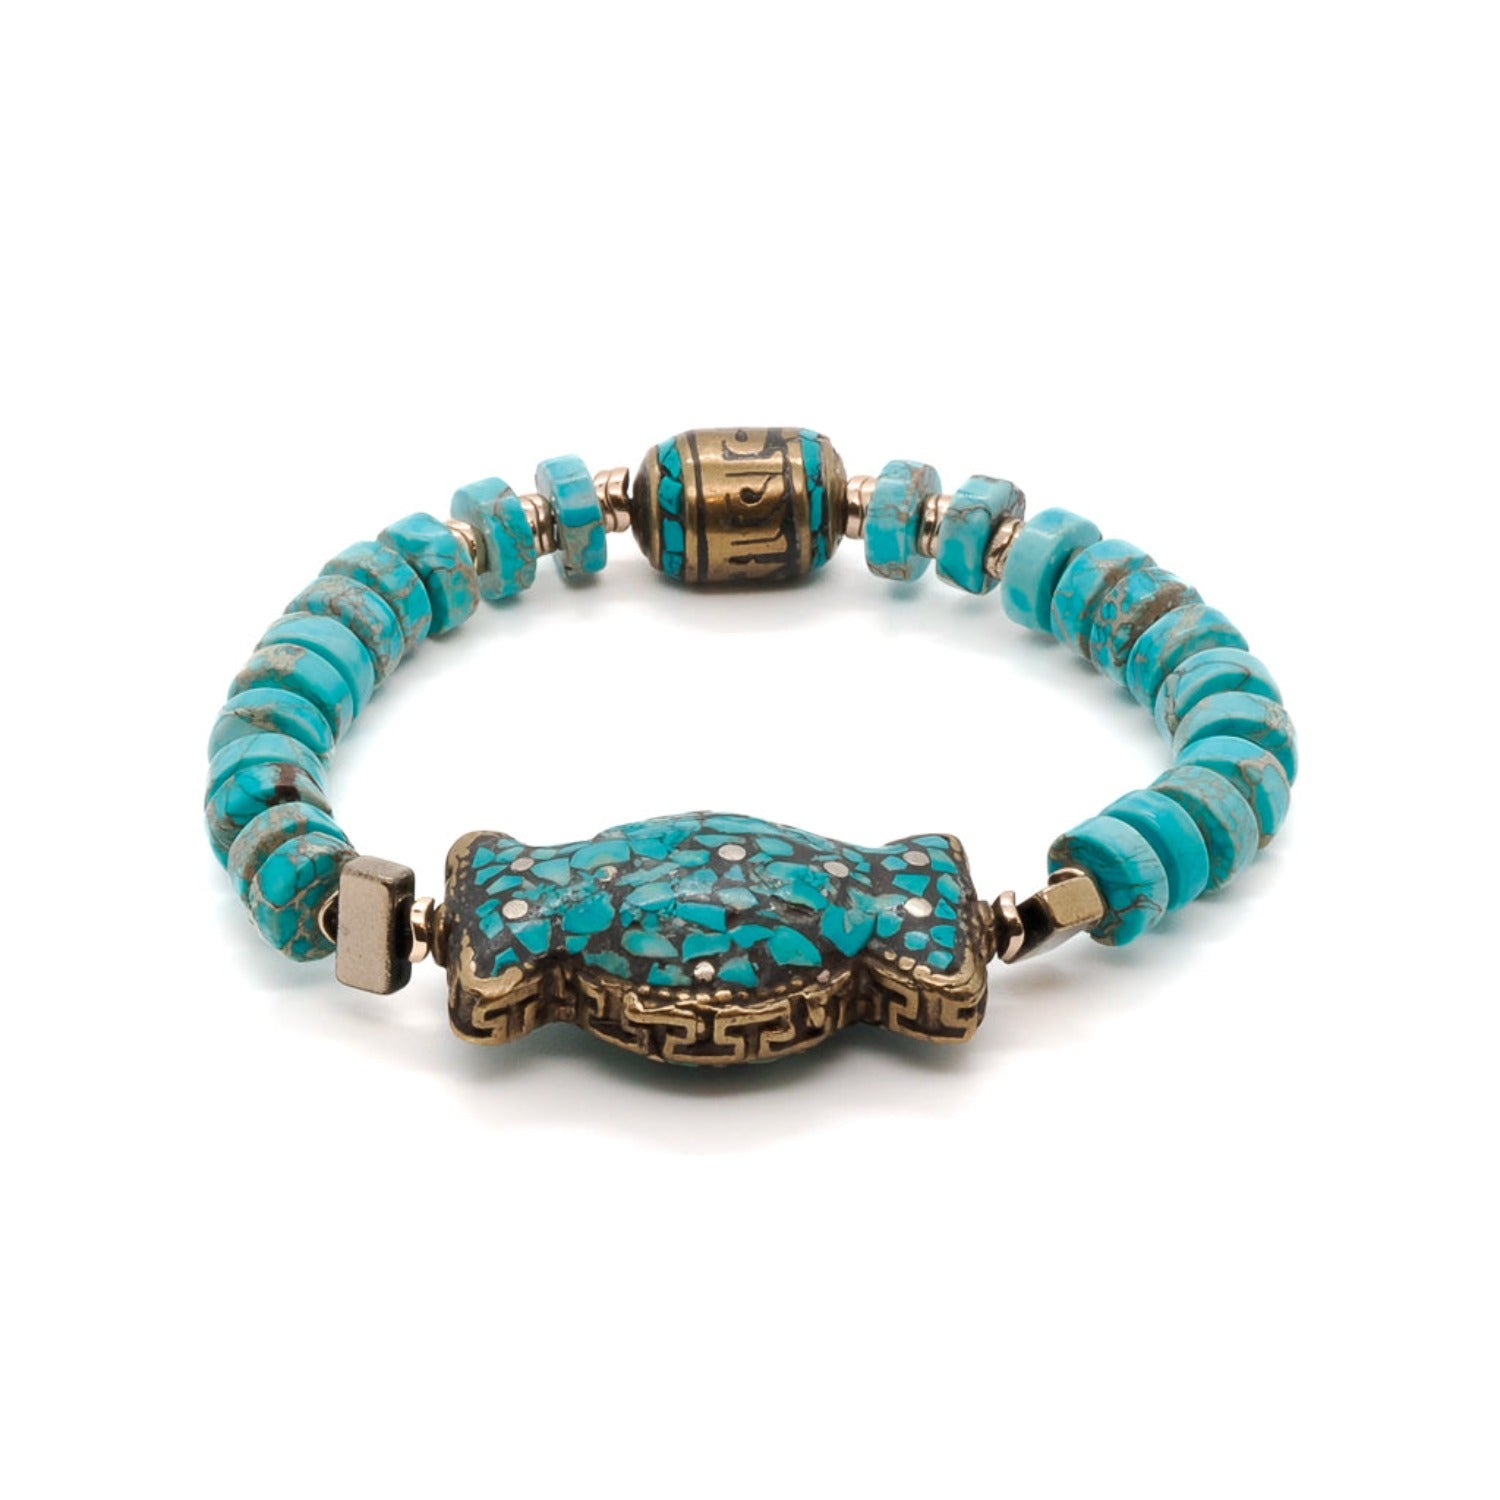 Cassandra Bracelet with turquoise and gold accents